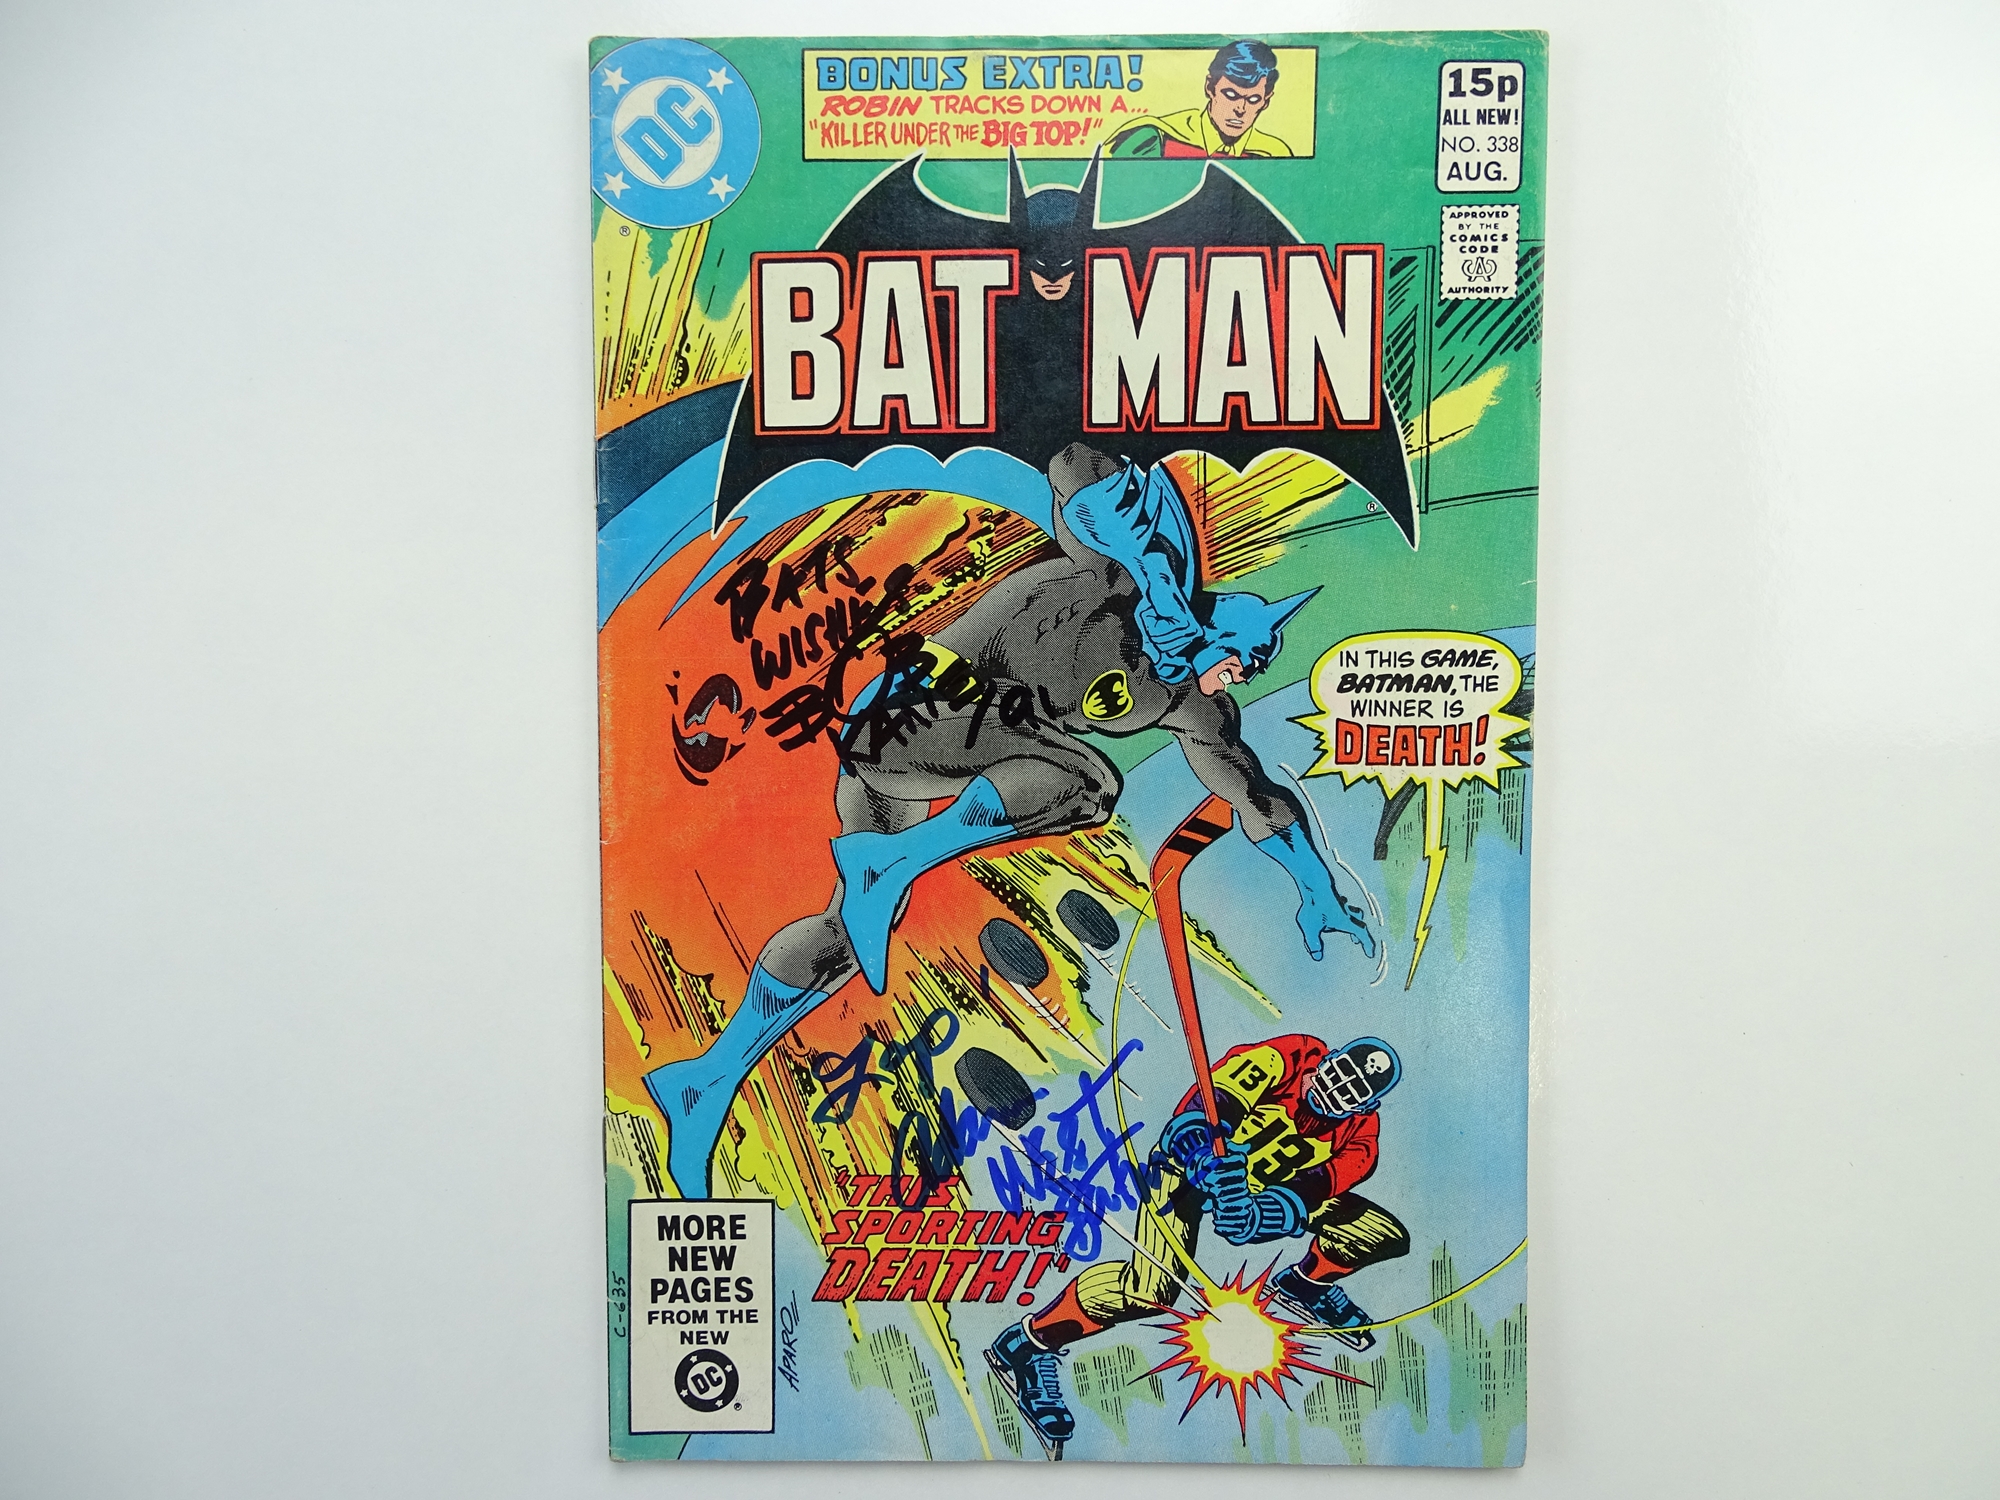 BATMAN # 338 - SIGNED - (1981 - DC - Pence Copy) - SIGNED - Signed (to front cover) dated and